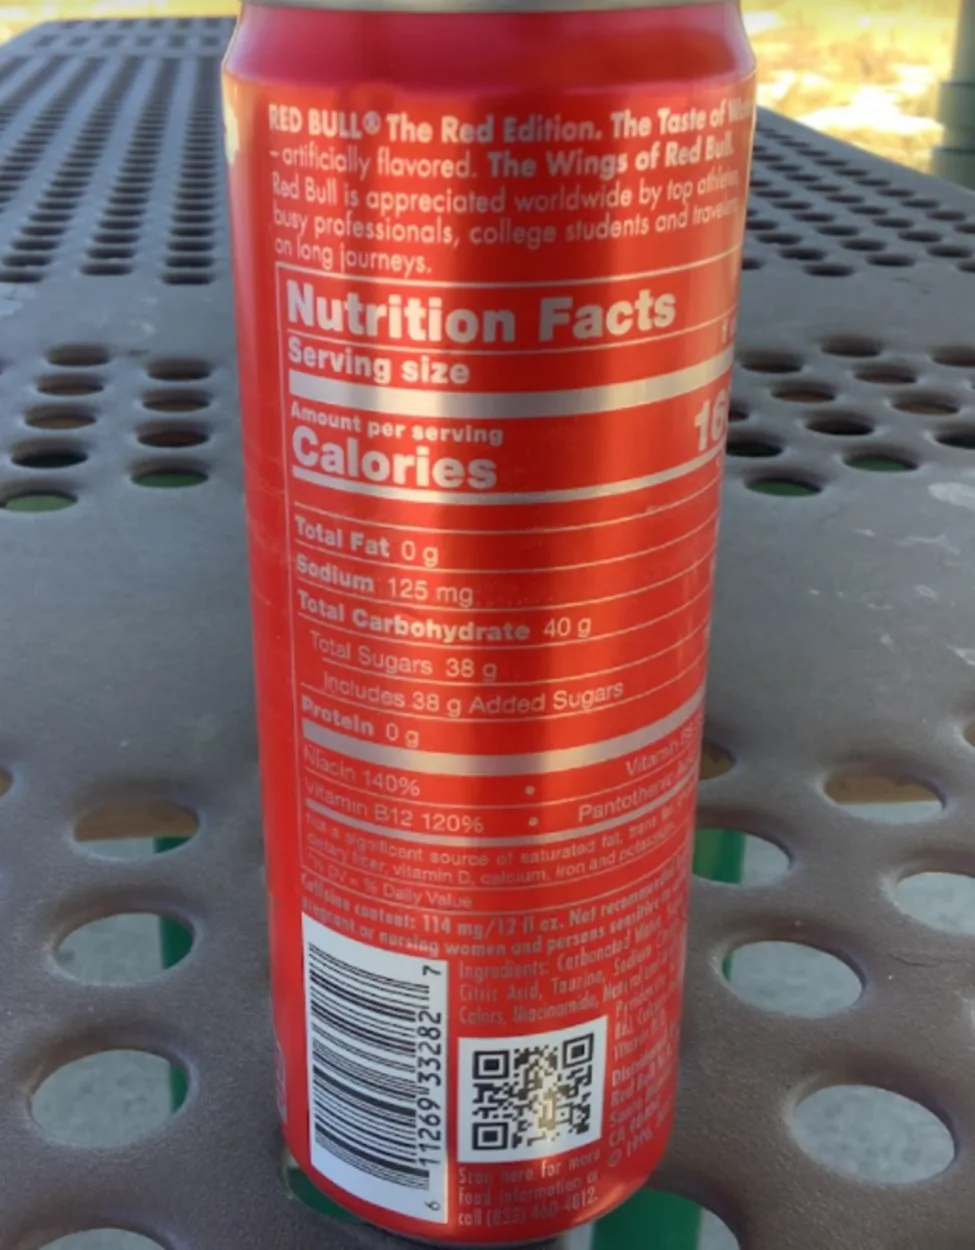 Red Bull Red Edition nutrition facts